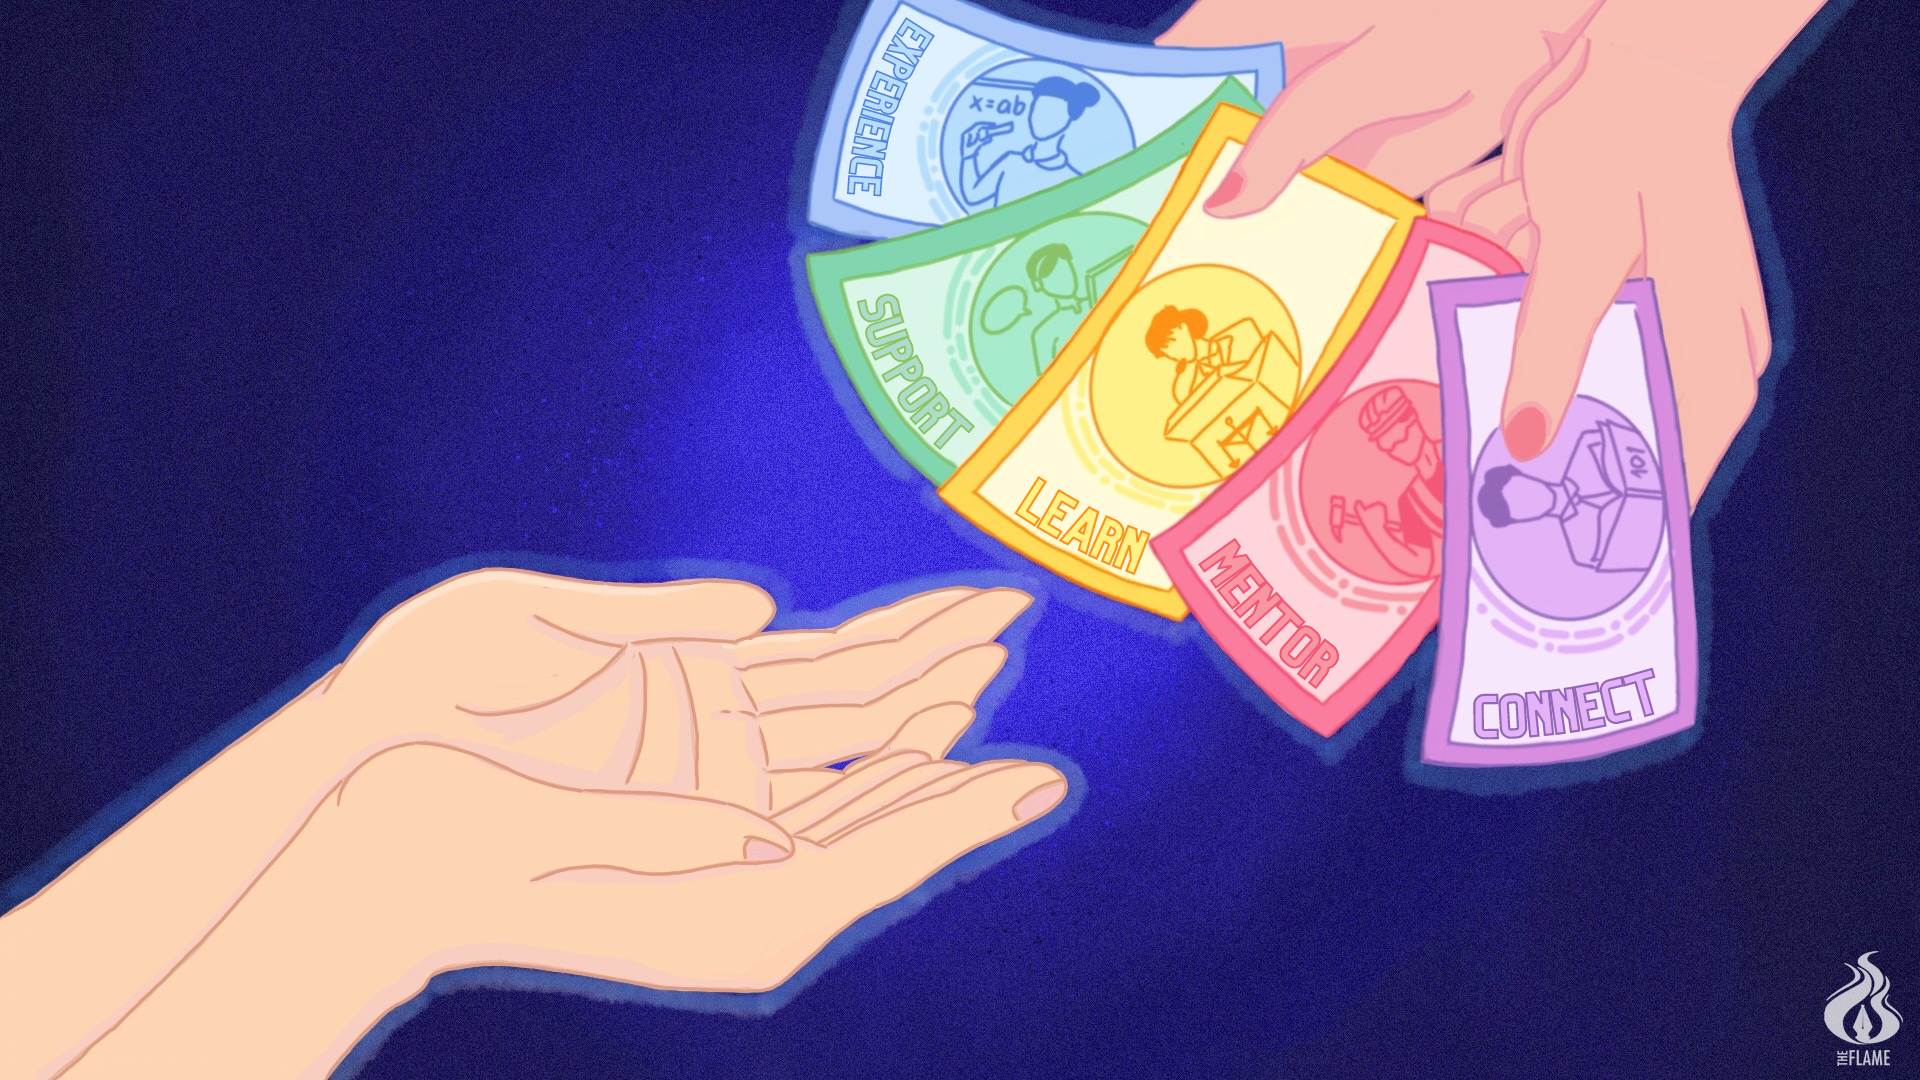 OJT season: Should student interns be compensated?